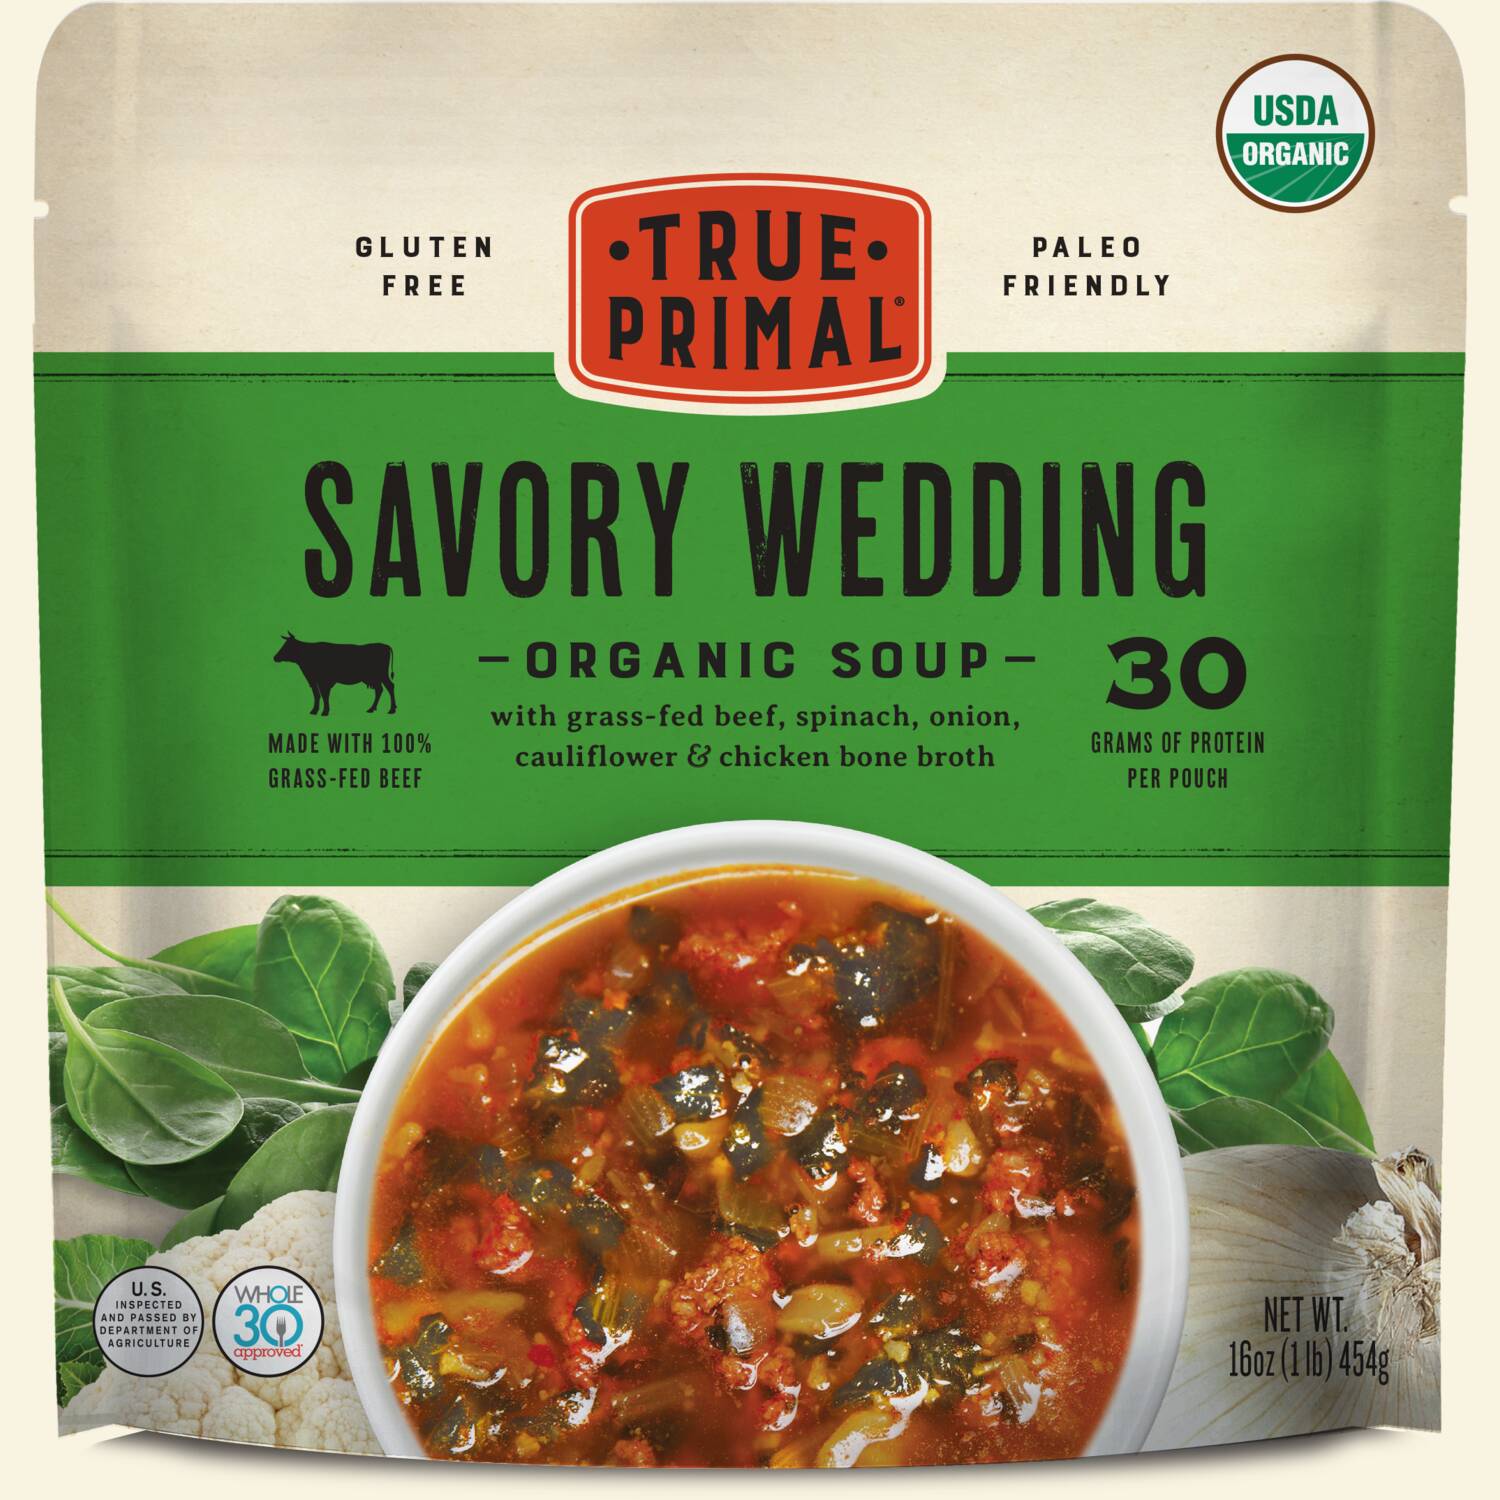 True Primal Savory Wedding Organic Soup in pouch, front